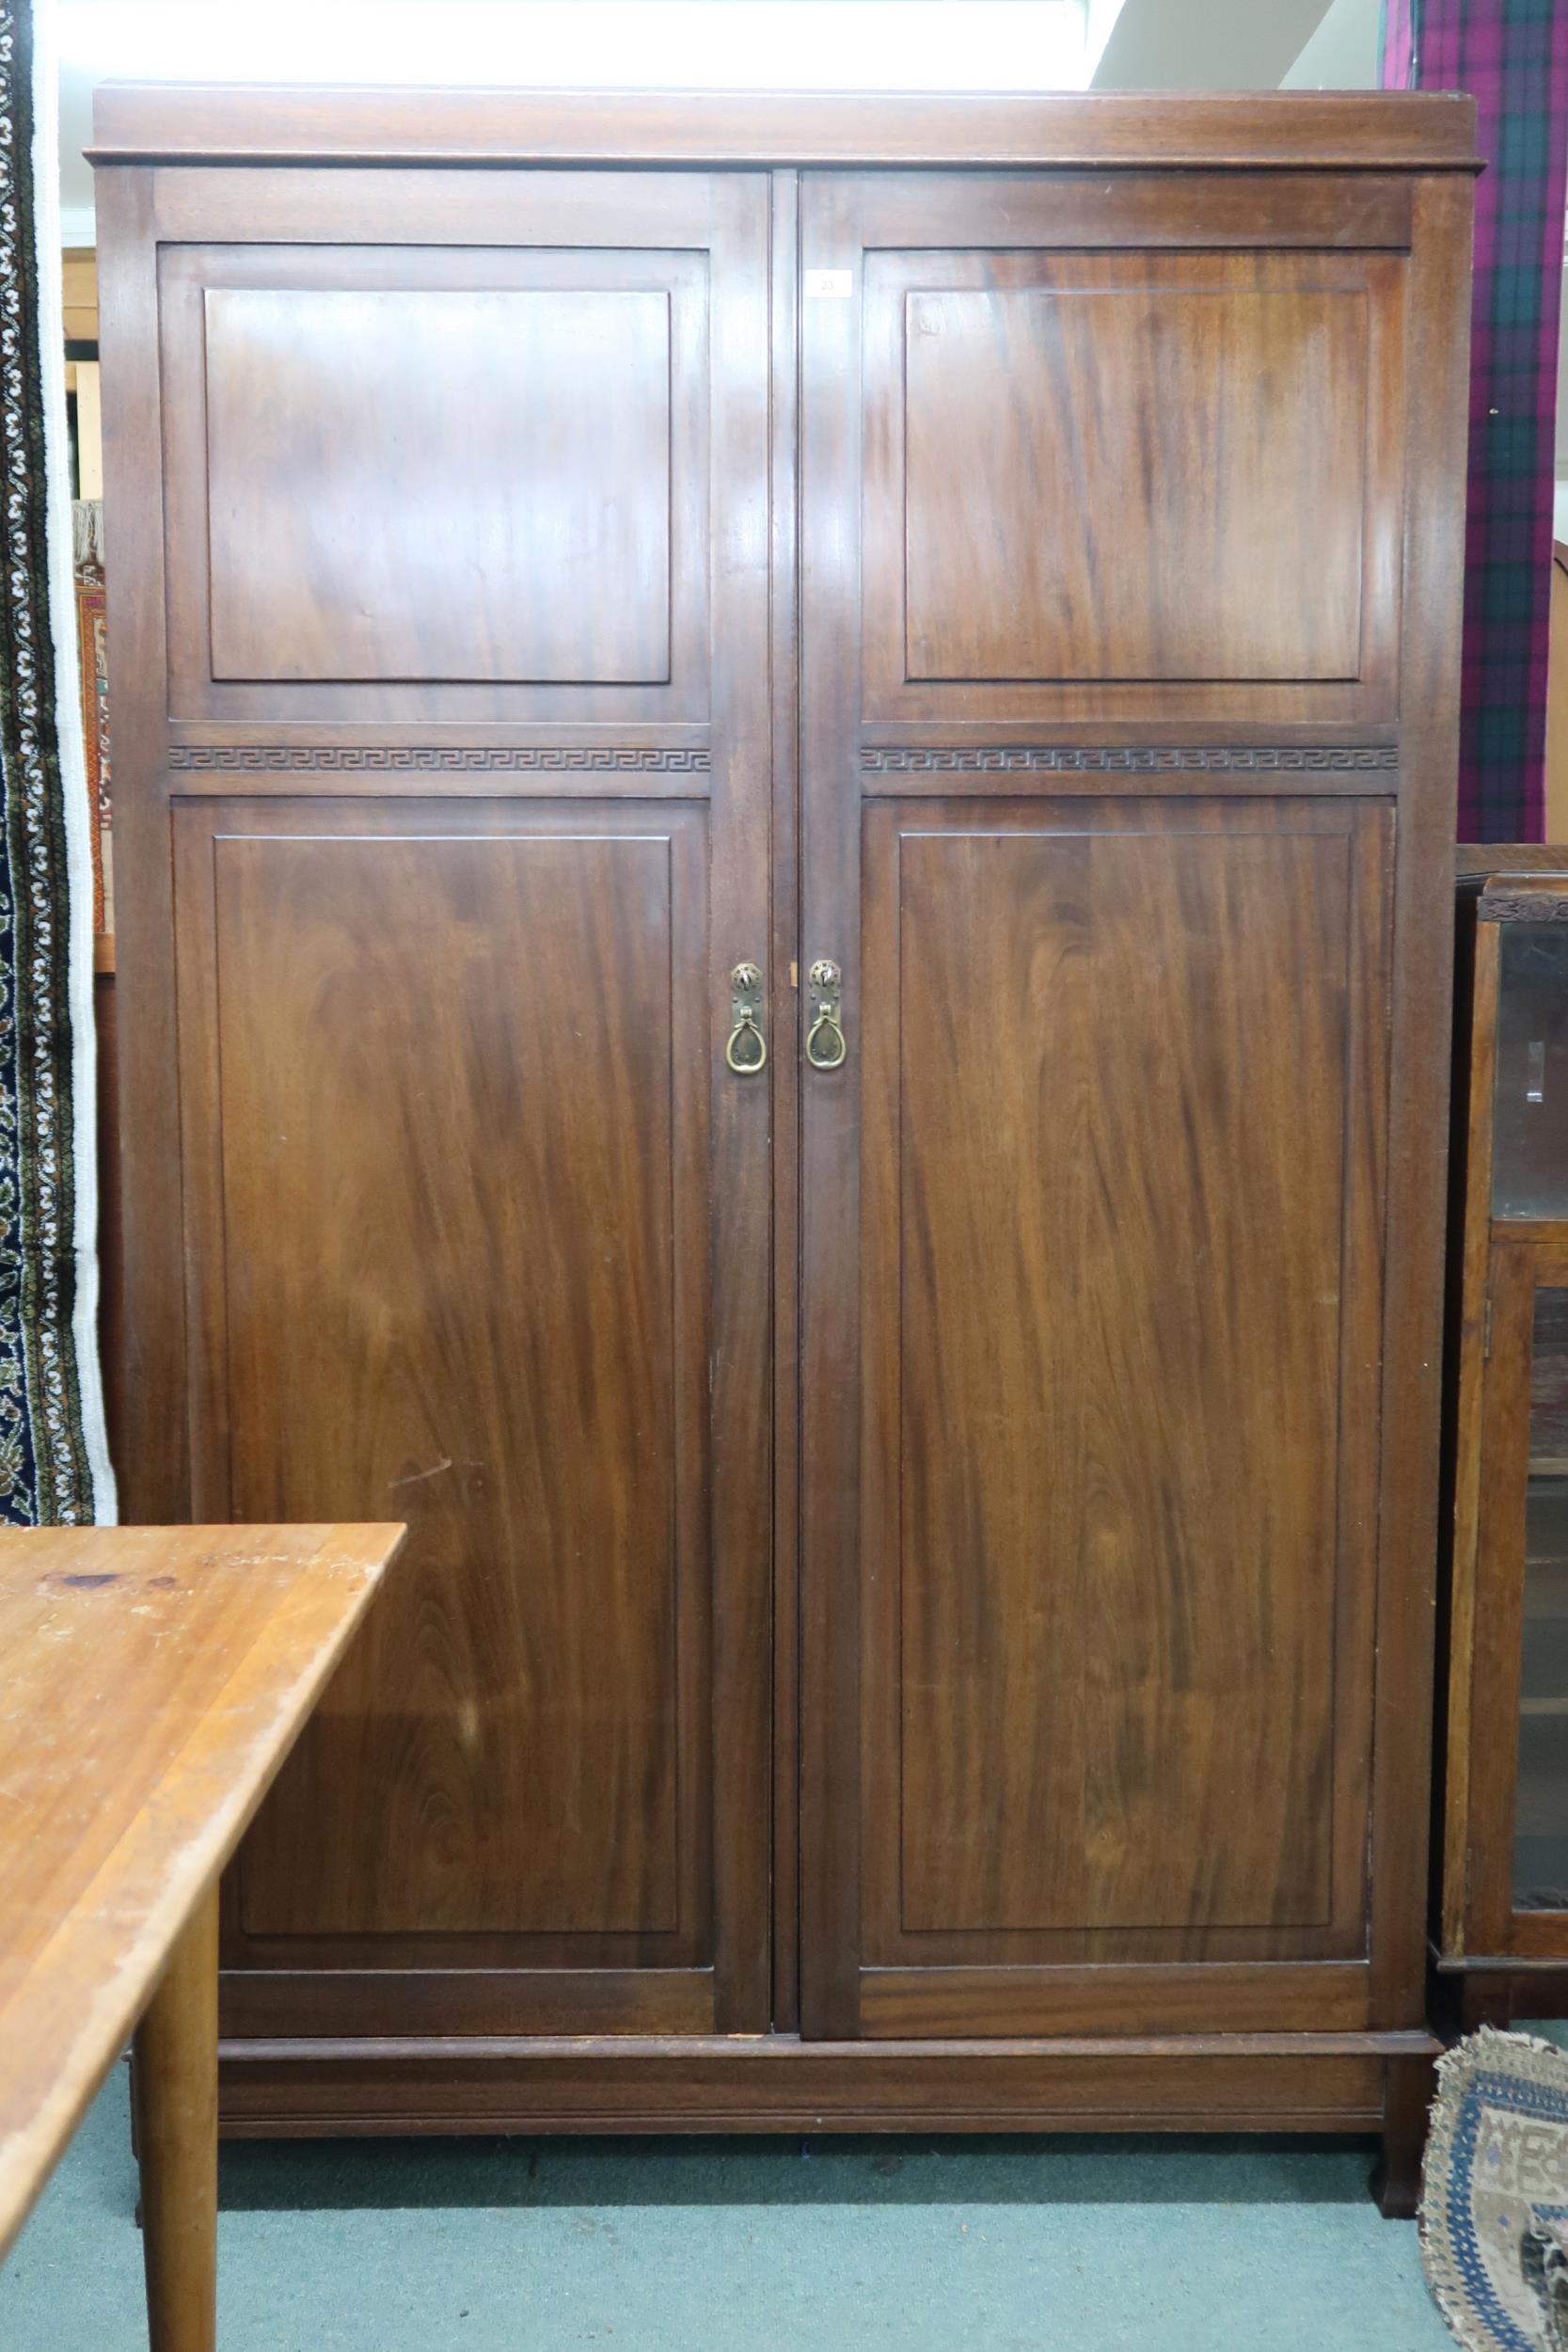 An early 20th century mahogany compactum wardrobe with pair of doors carved with Grecian key